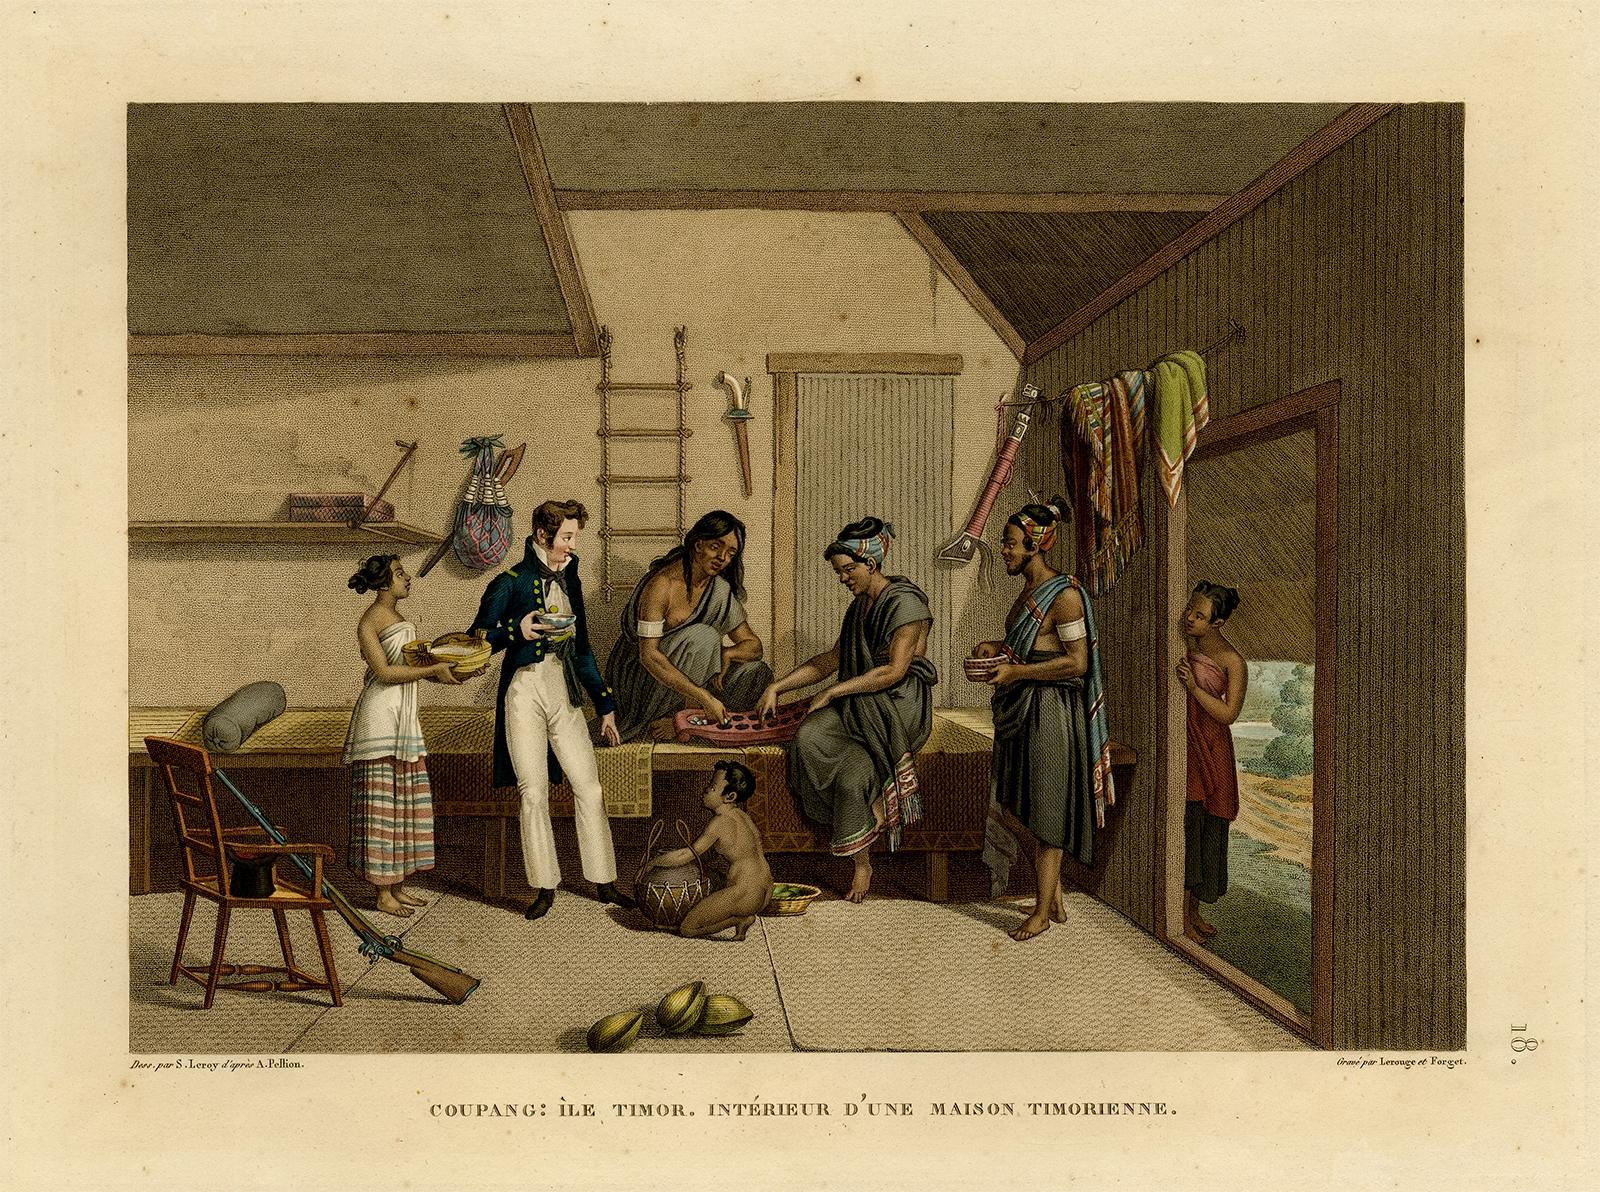 Antique print, titled: 'Coupang: Ile Timor. Interieur d'une Maison Timorienne.' - ('Coupang, Timor Island. Interior of a Timor house'). 

View of the interior of a house, with native family and a European visitor. Source: 'Voyage autour du monde